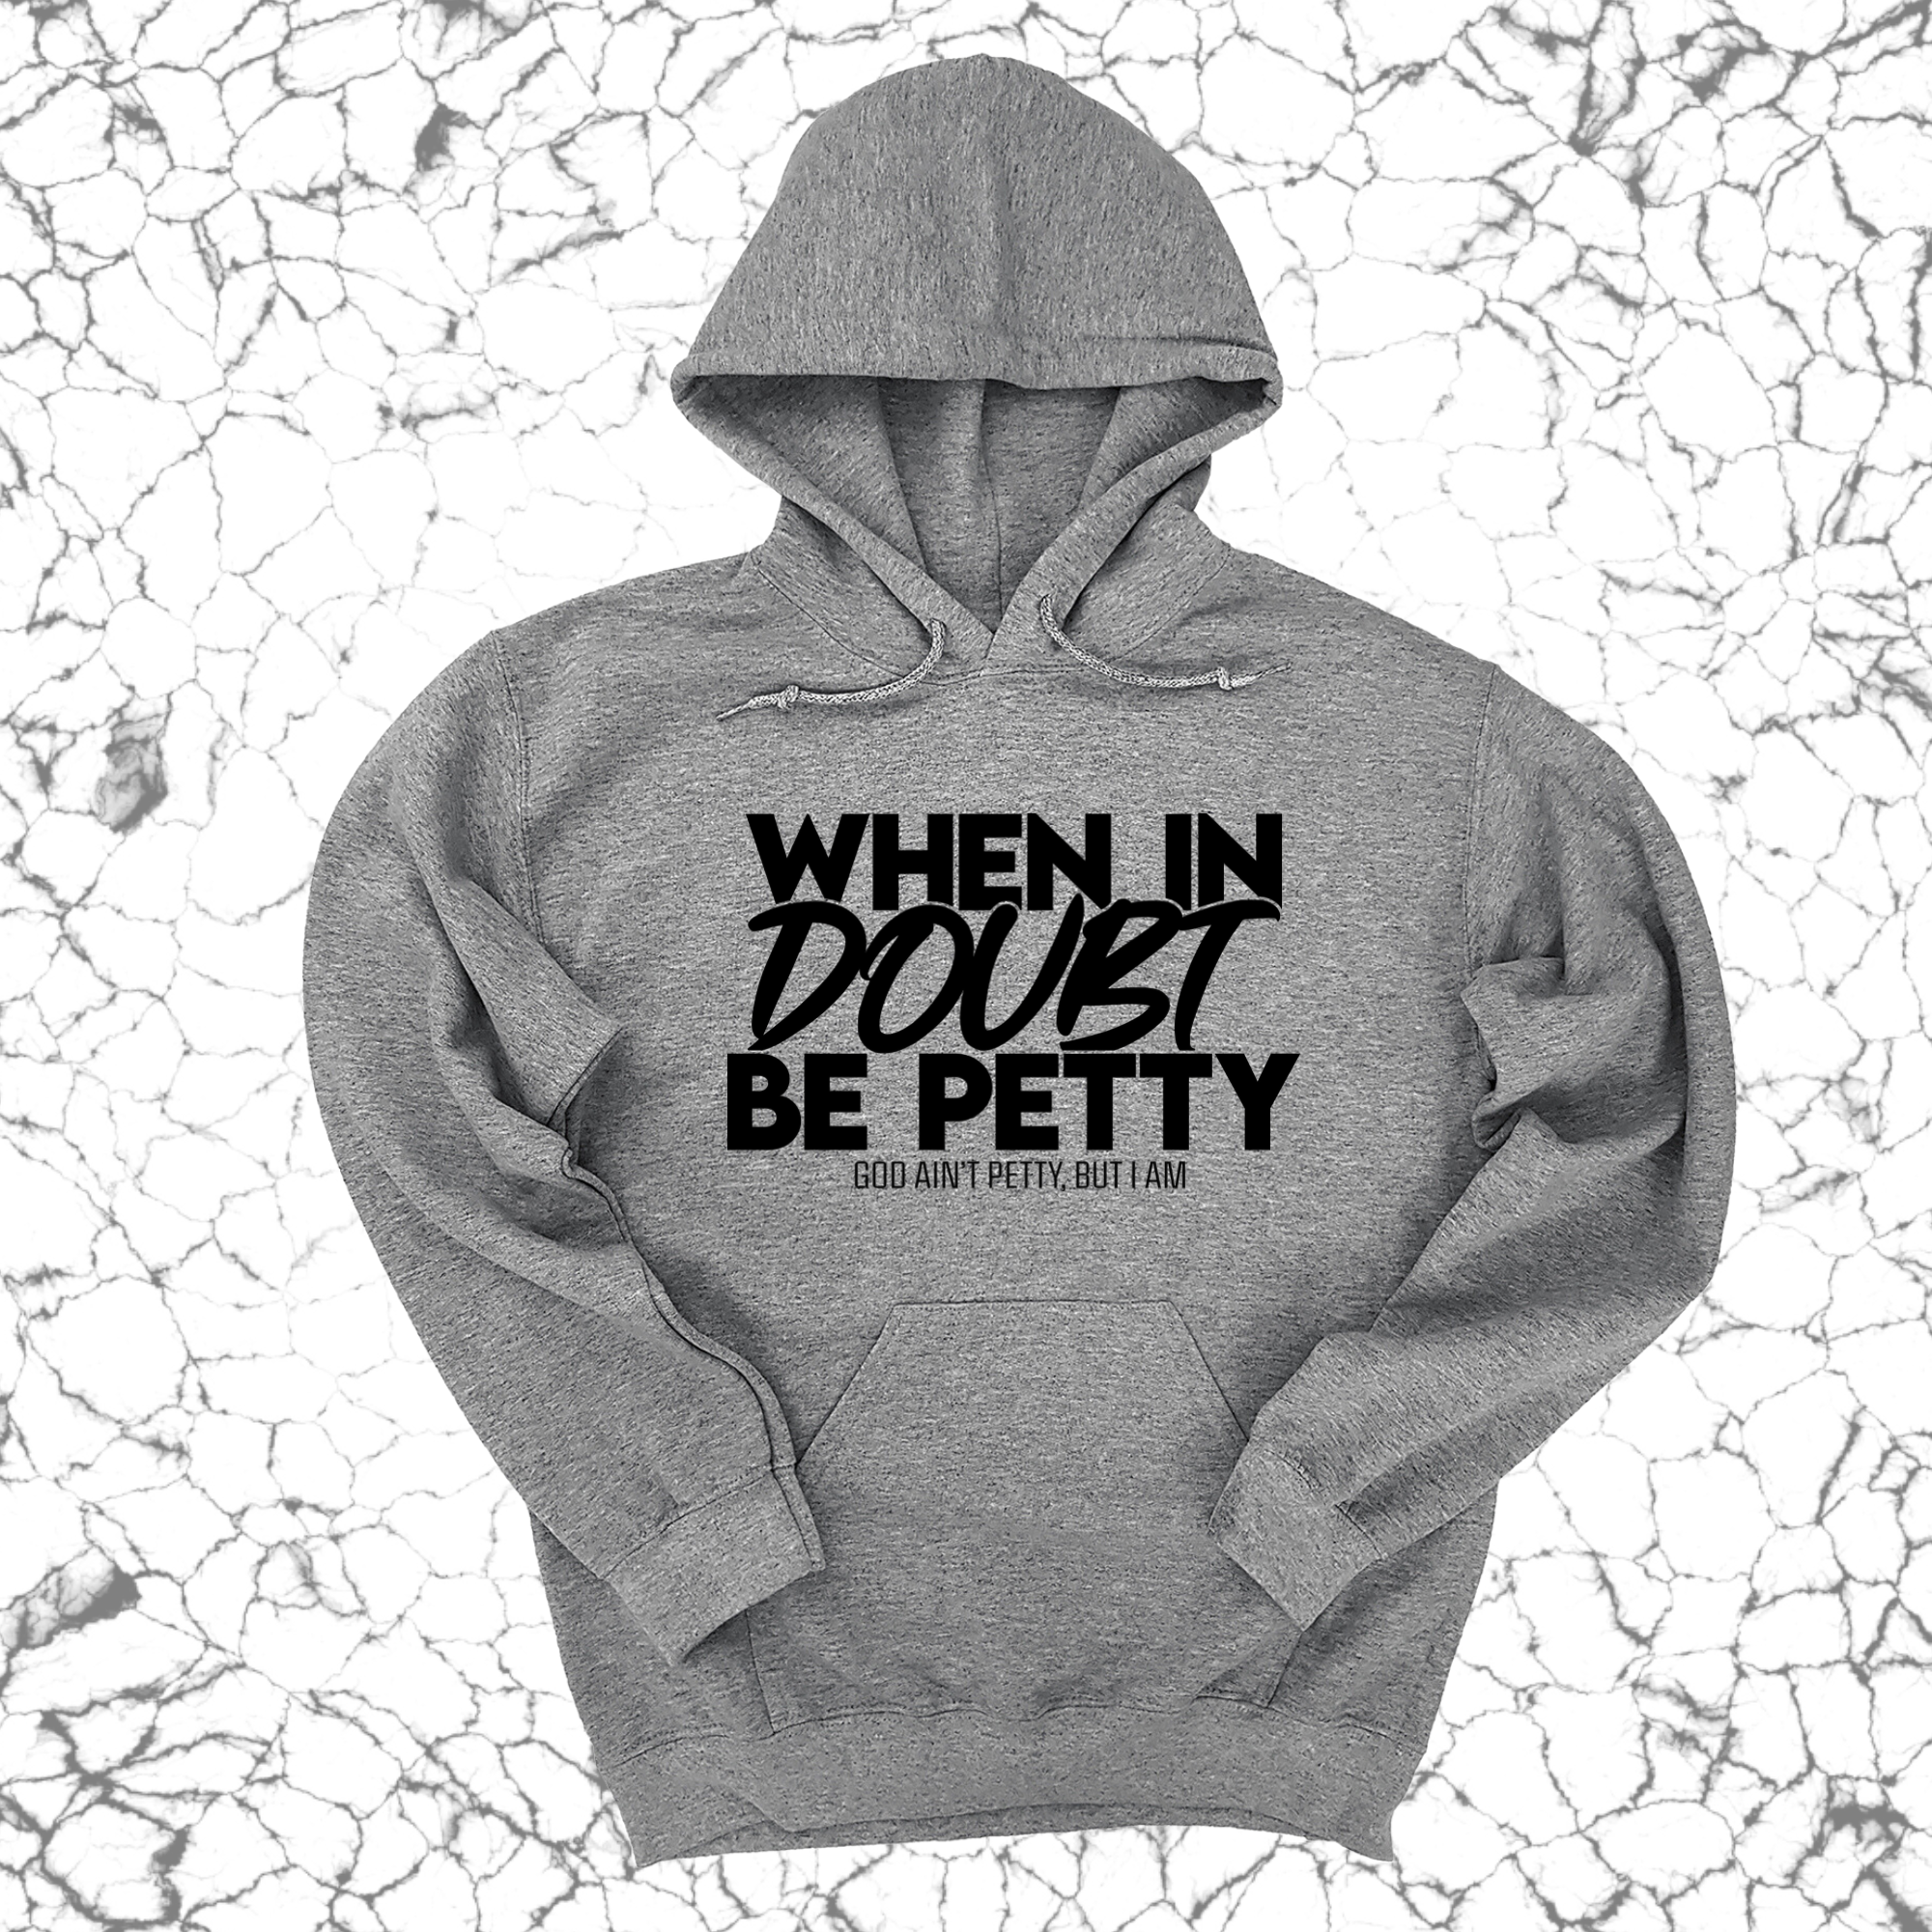 When in doubt be petty Unisex Hoodie-Hoodie-The Original God Ain't Petty But I Am